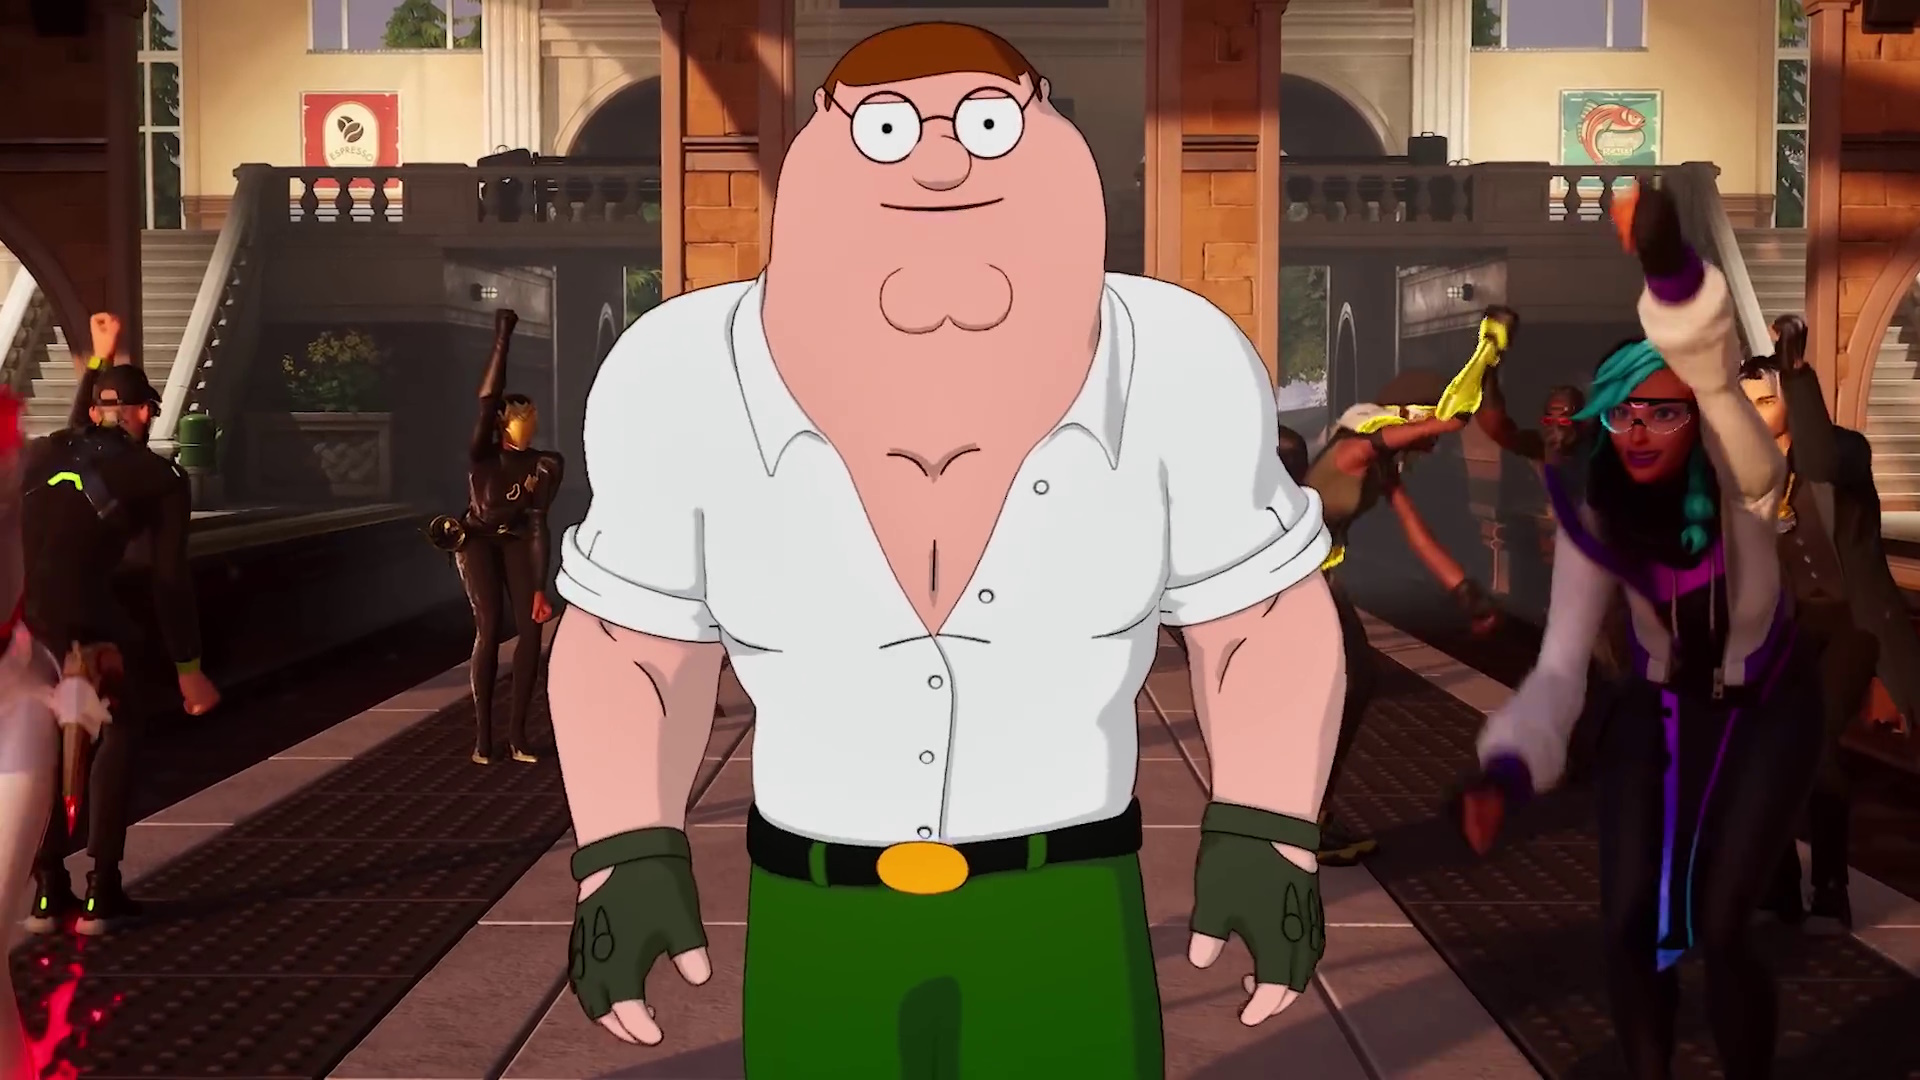 A muscular Peter Griffin from Family Guy walks among various Fortnite characters.